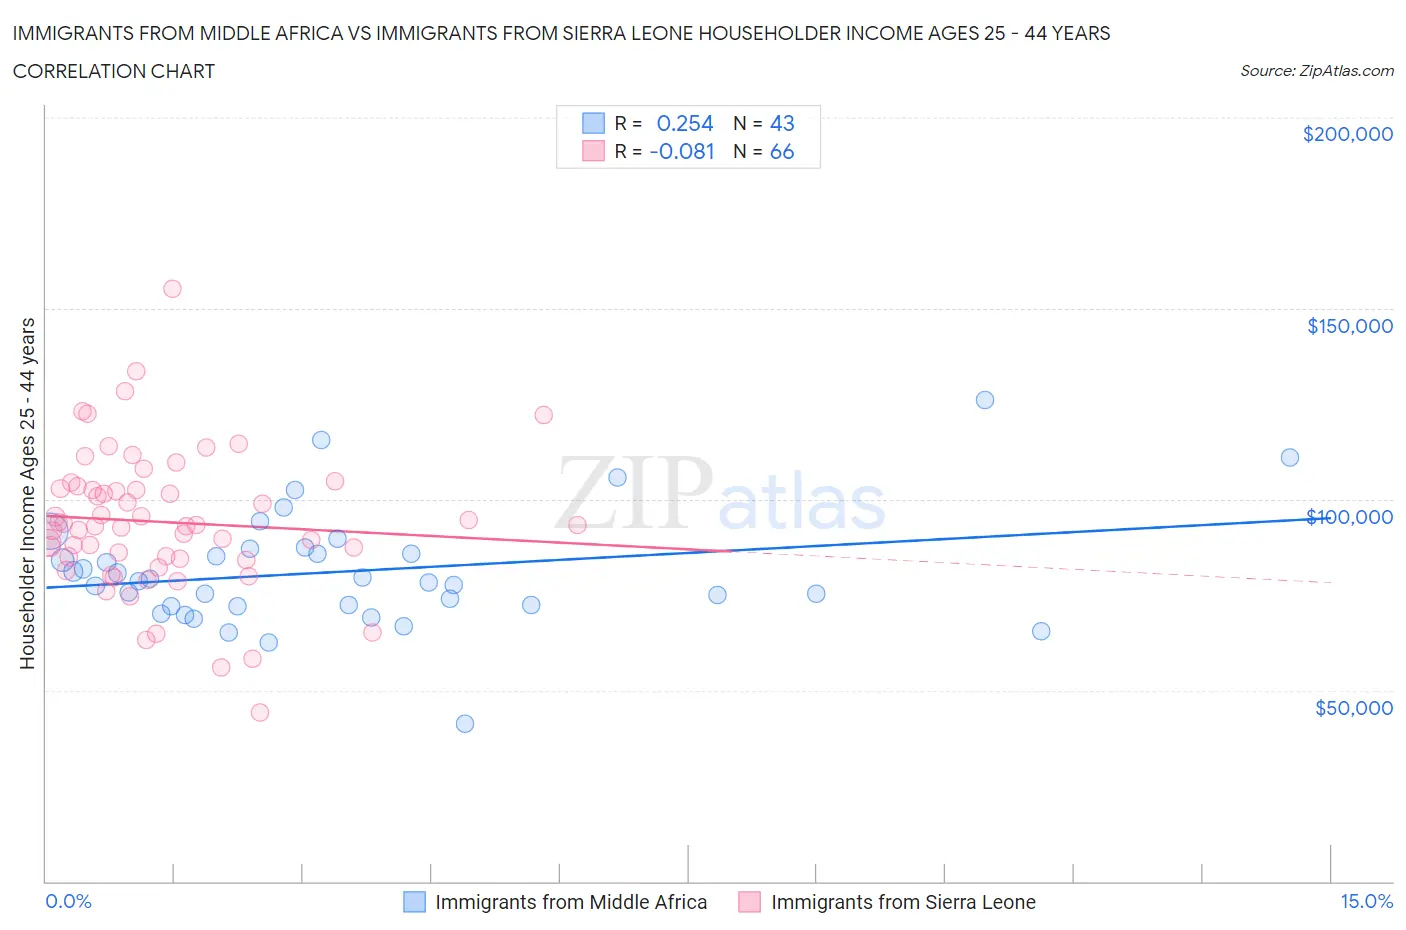 Immigrants from Middle Africa vs Immigrants from Sierra Leone Householder Income Ages 25 - 44 years